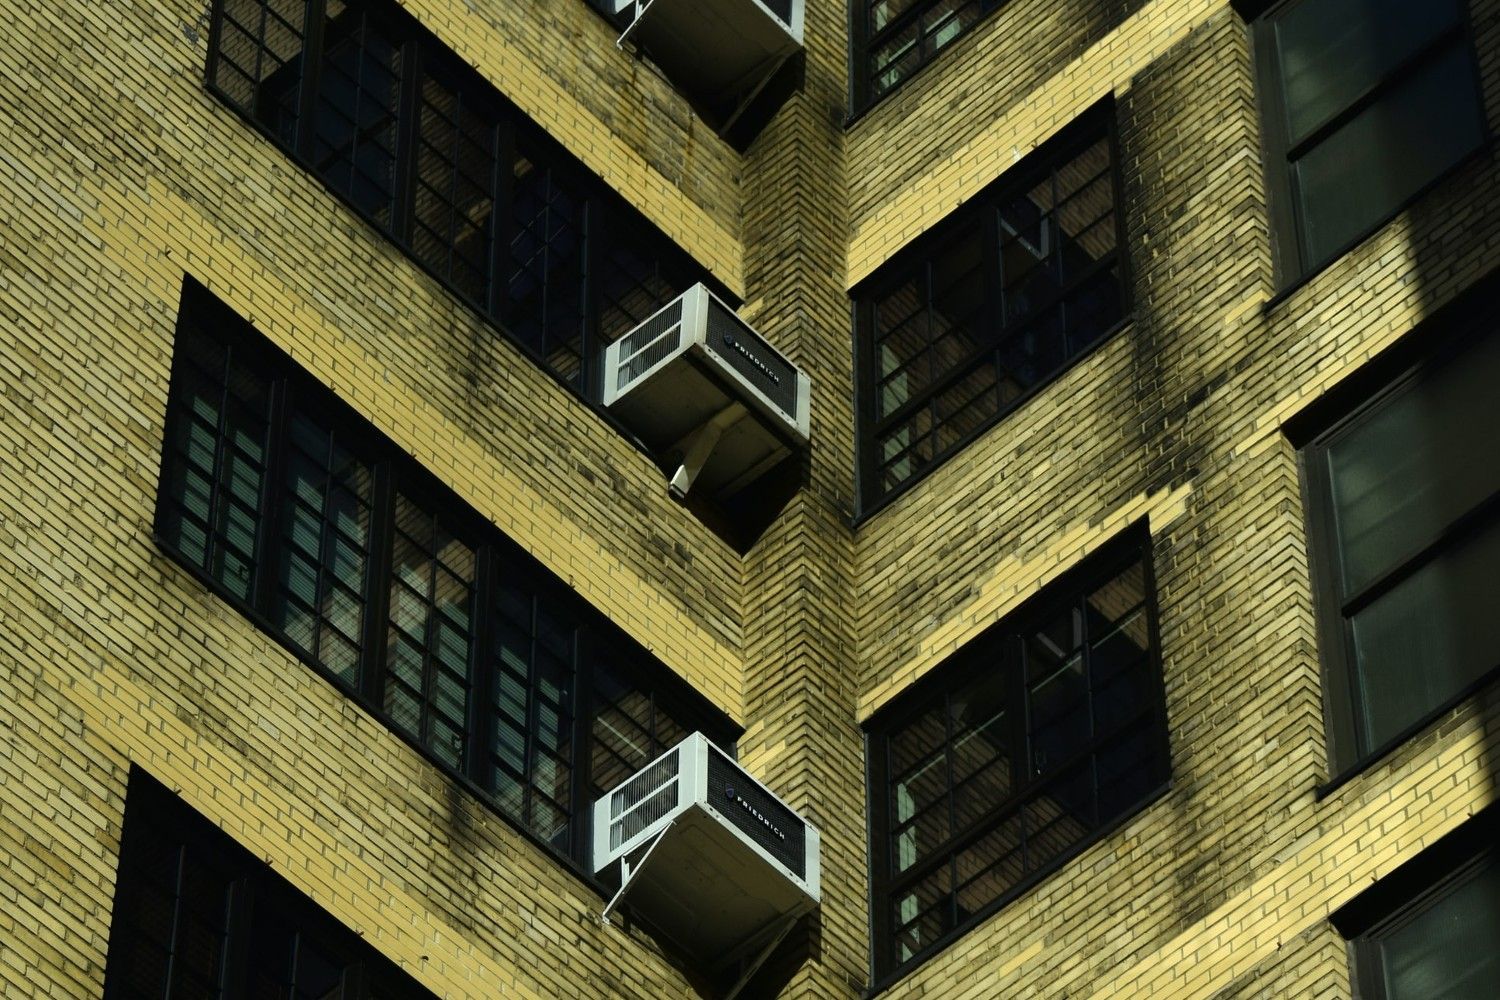 Air conditioners in a brick building.